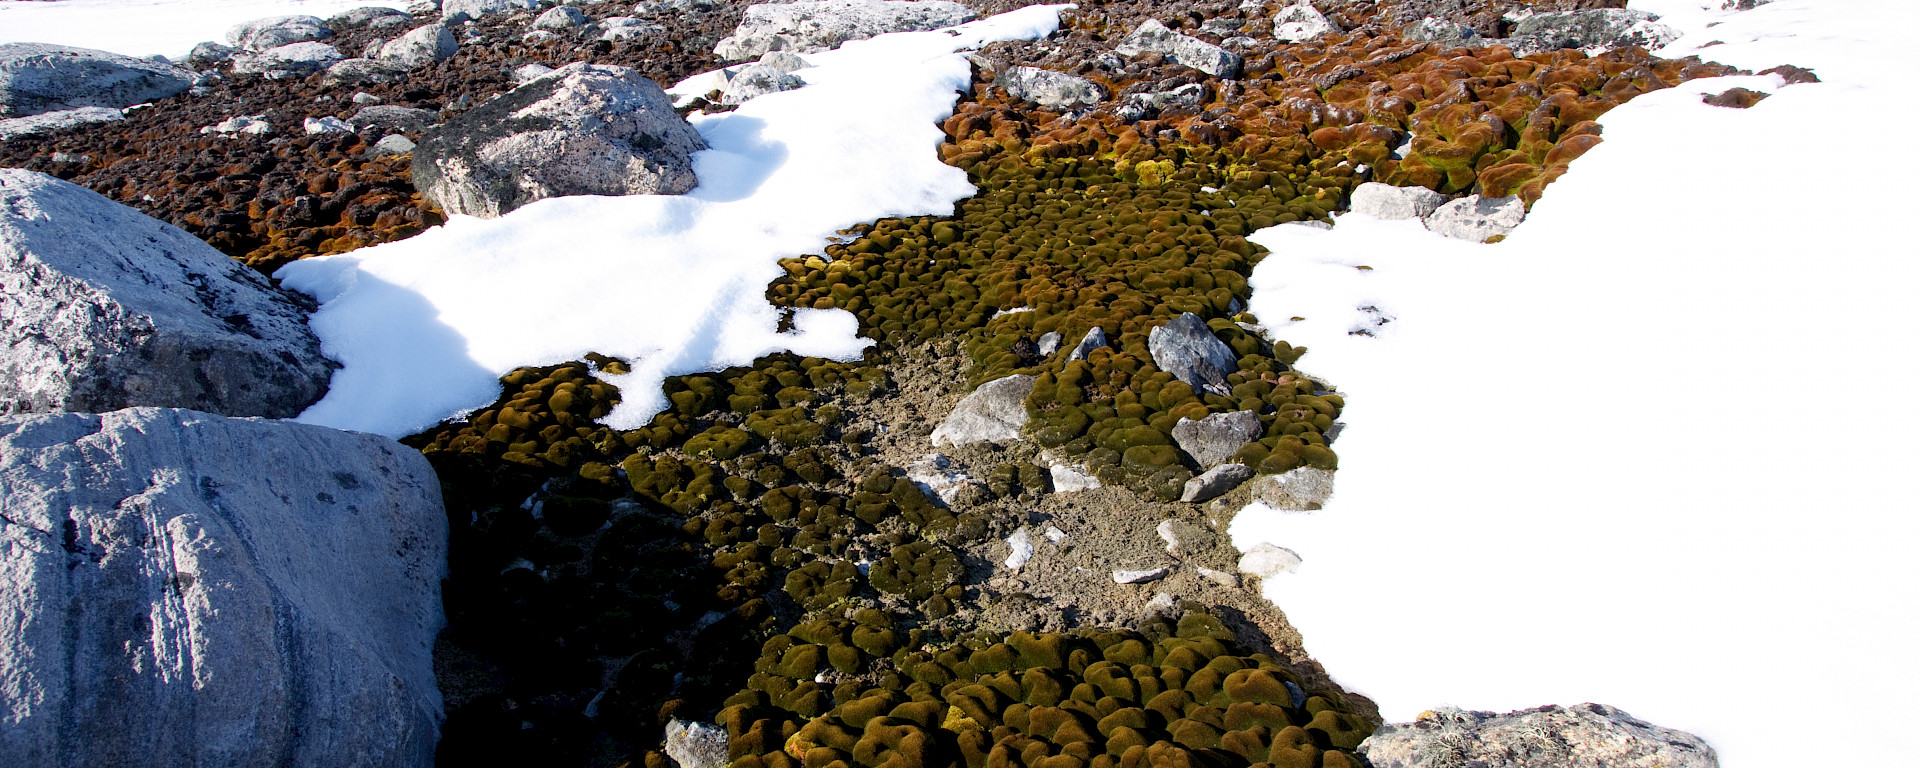 Moss surrounded by patches of snow and rocks.